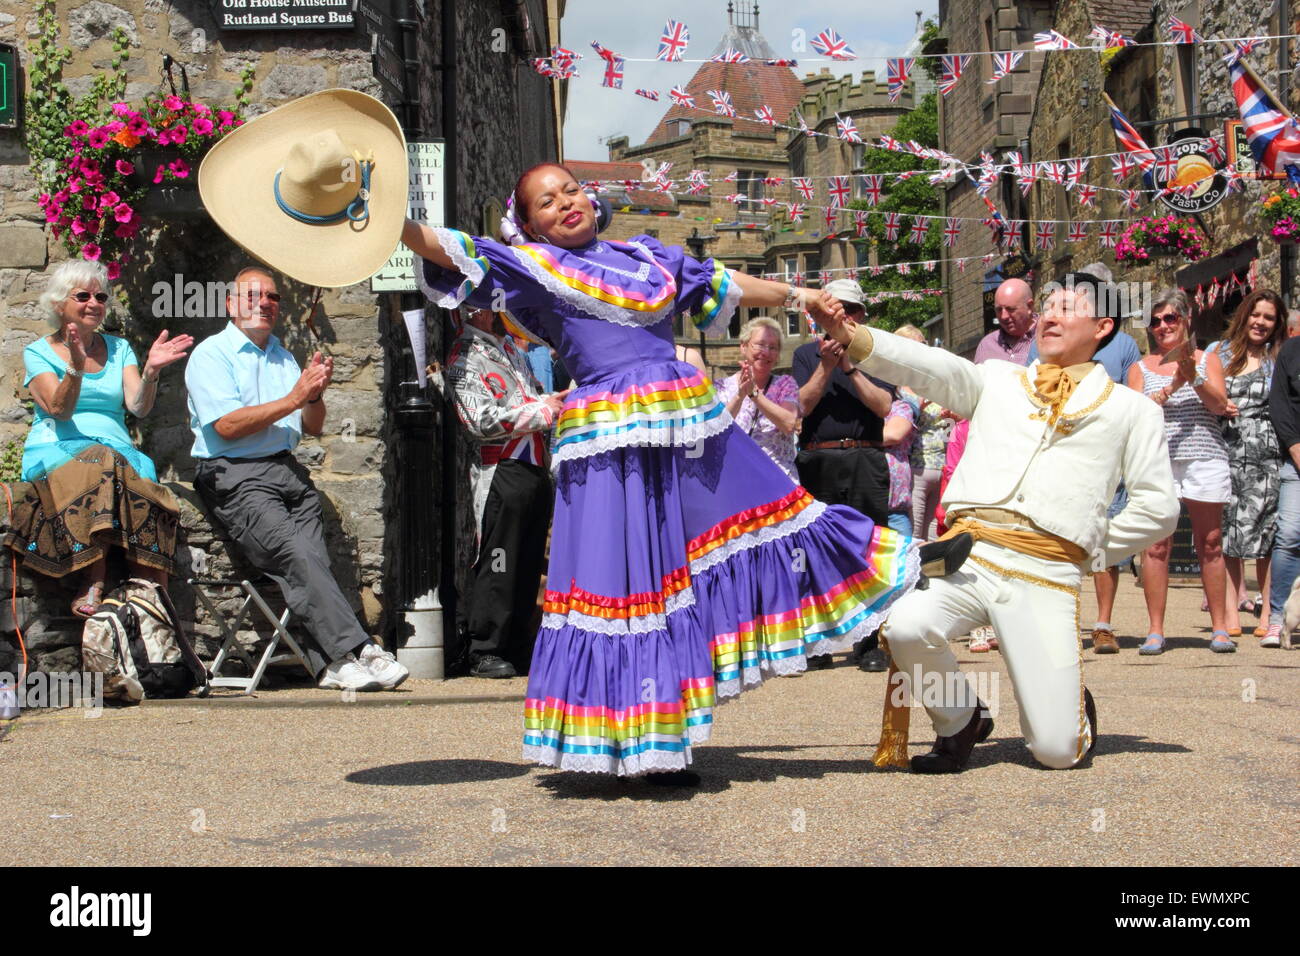 Members of Son de America, a Latin American dance group perform outdoors at the Bakewell International Day of Dance, Bakewell UK Stock Photo